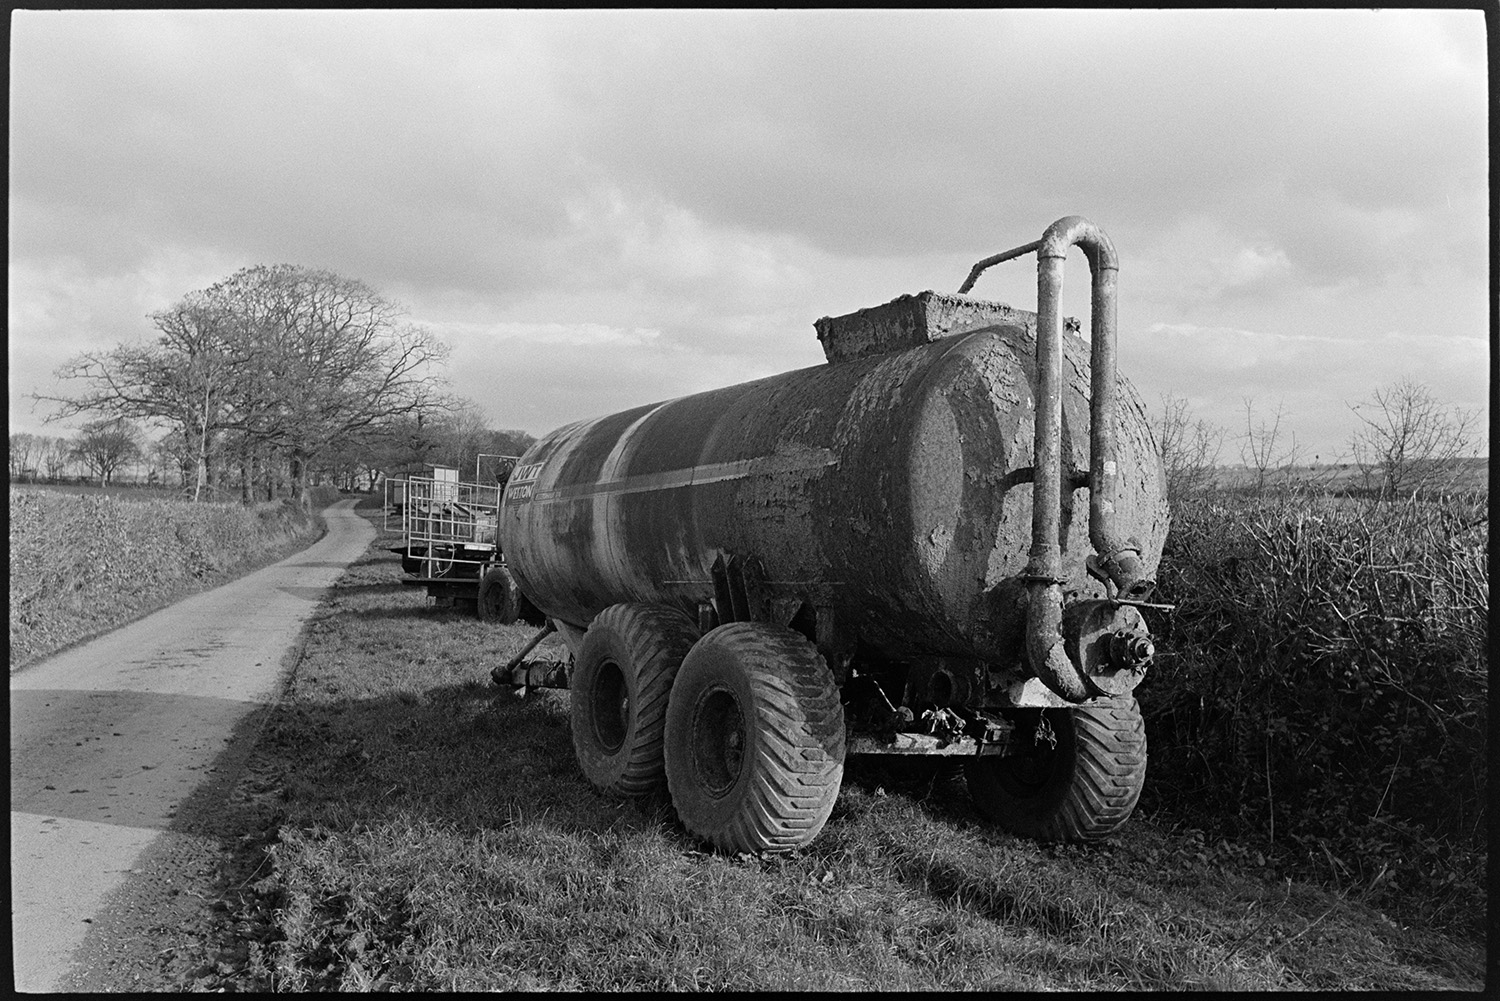 Large silage or muck tanker parked beside road. 
[A muck spreader or silage tanker parked on the verge between a hedge and road at Parsonage Farm, Chulmleigh. Other trailers are parked further along the verge.]